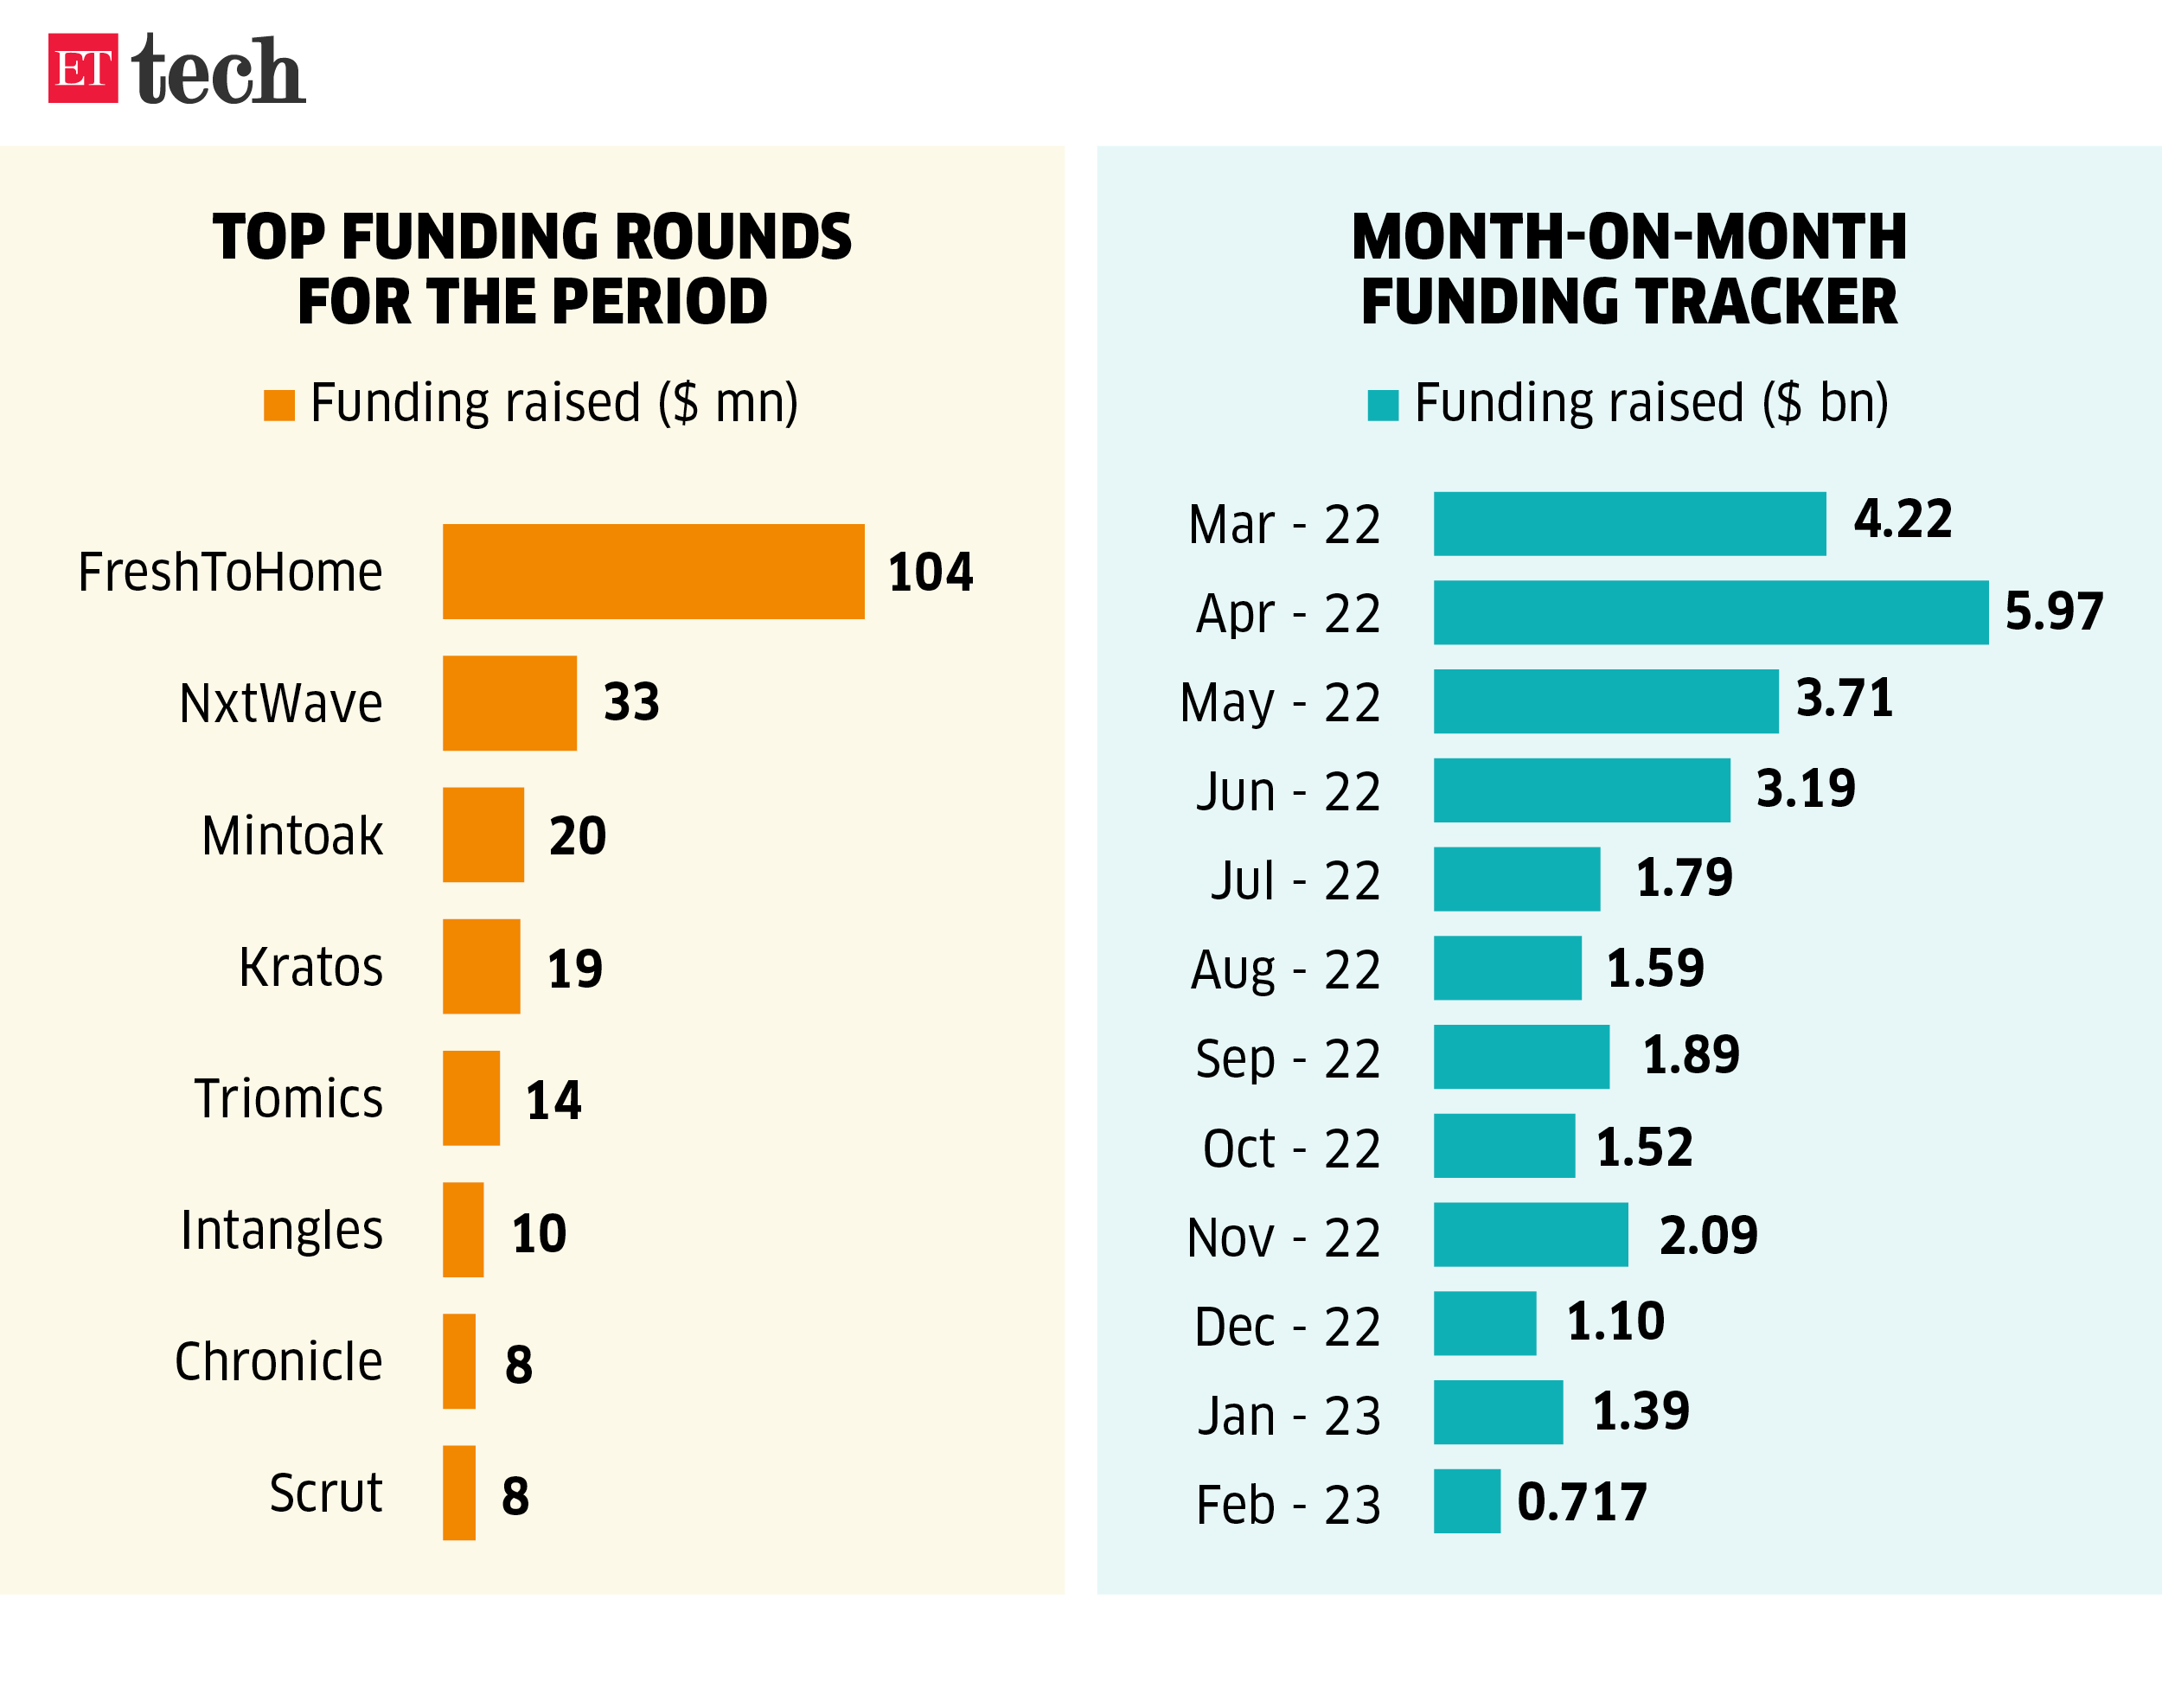 Top funding rounds